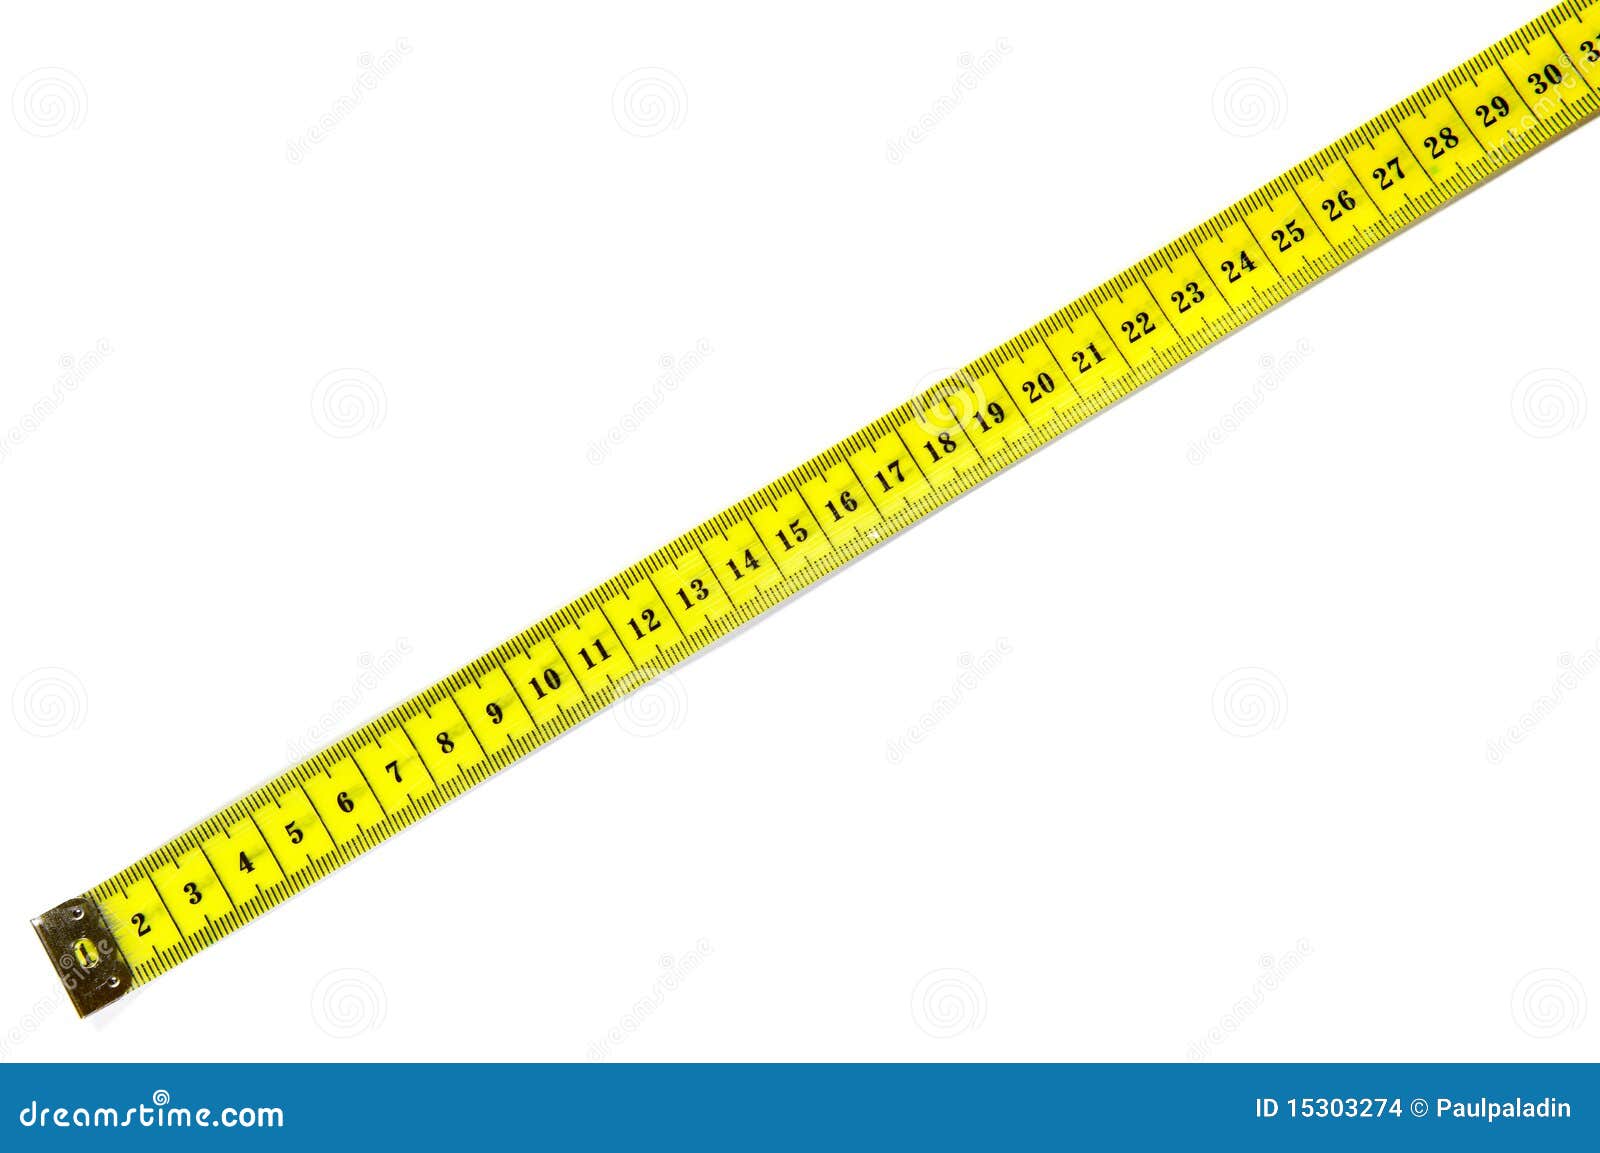 Measuring Tape Ruler Cm Numbers 90 Stock Photo - Download Image